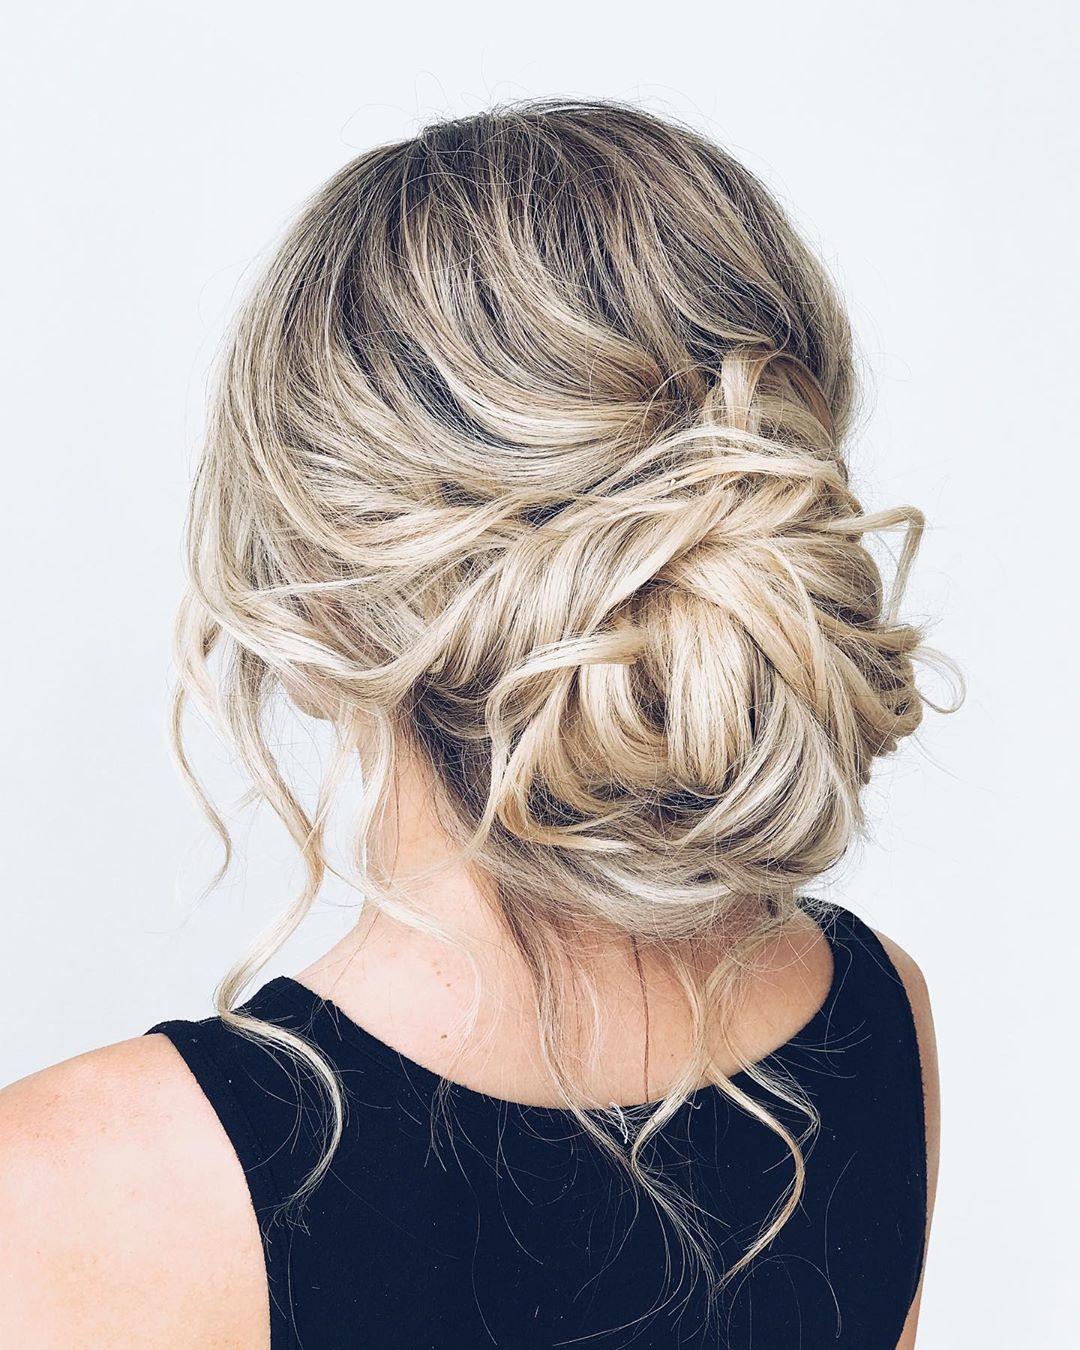 Keep Your Hairdo Flawless in a Messy Bun Hairstyle